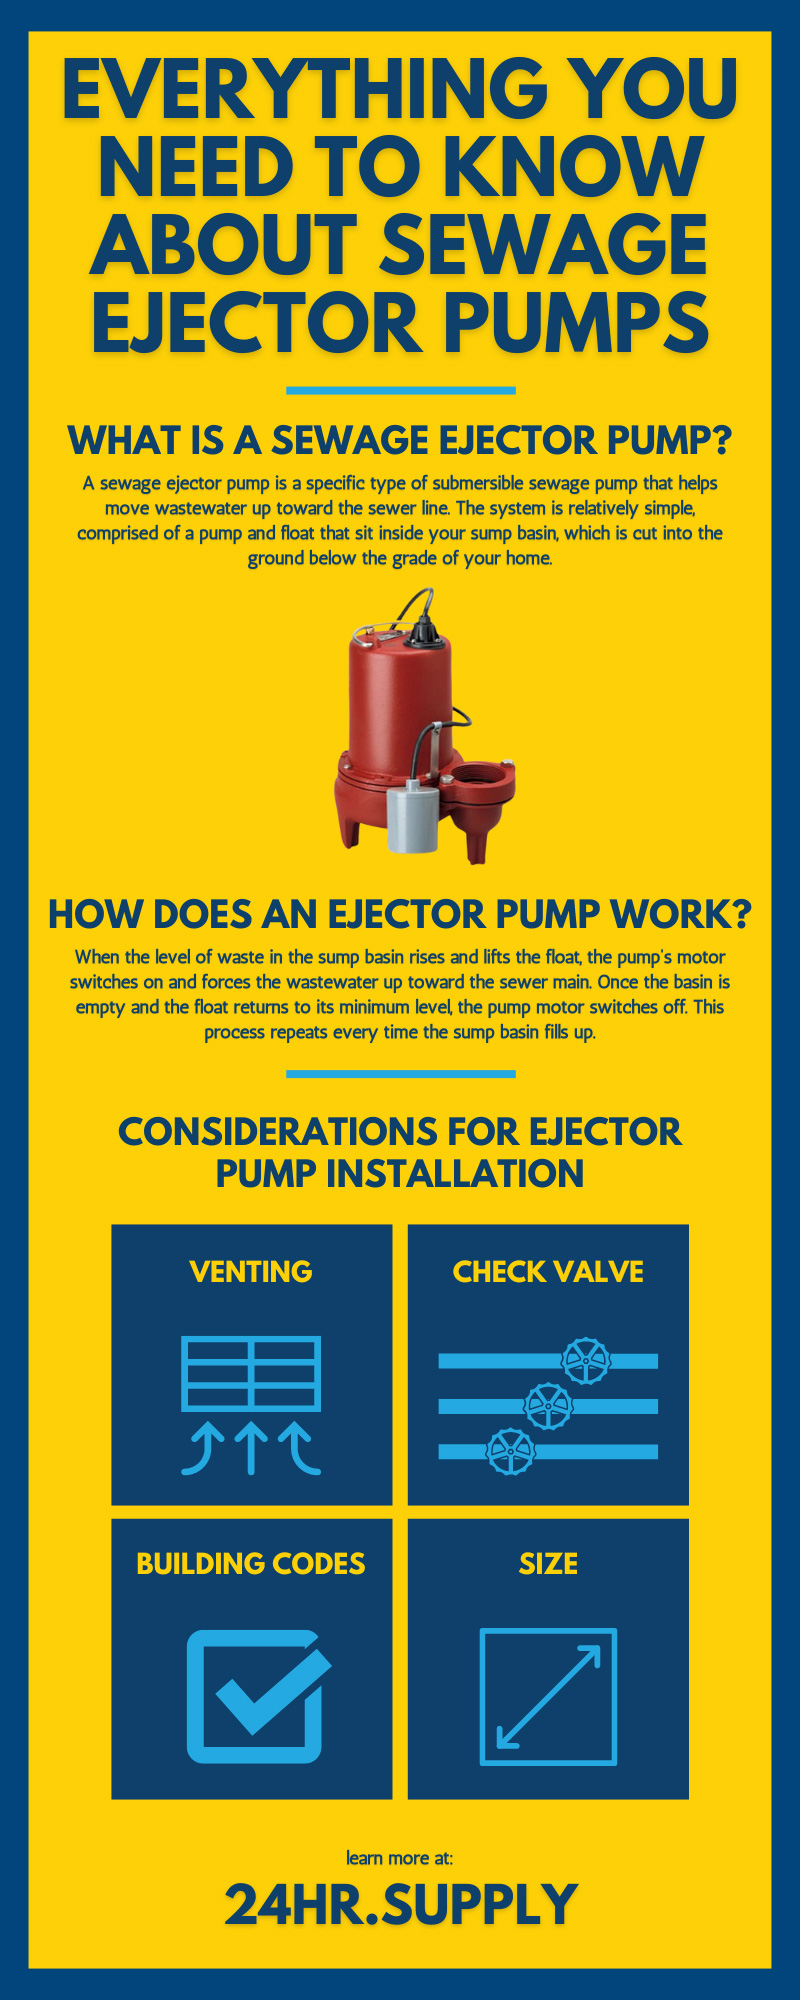 Pump Know-How: Can sewage pumps be used as sump pumps?